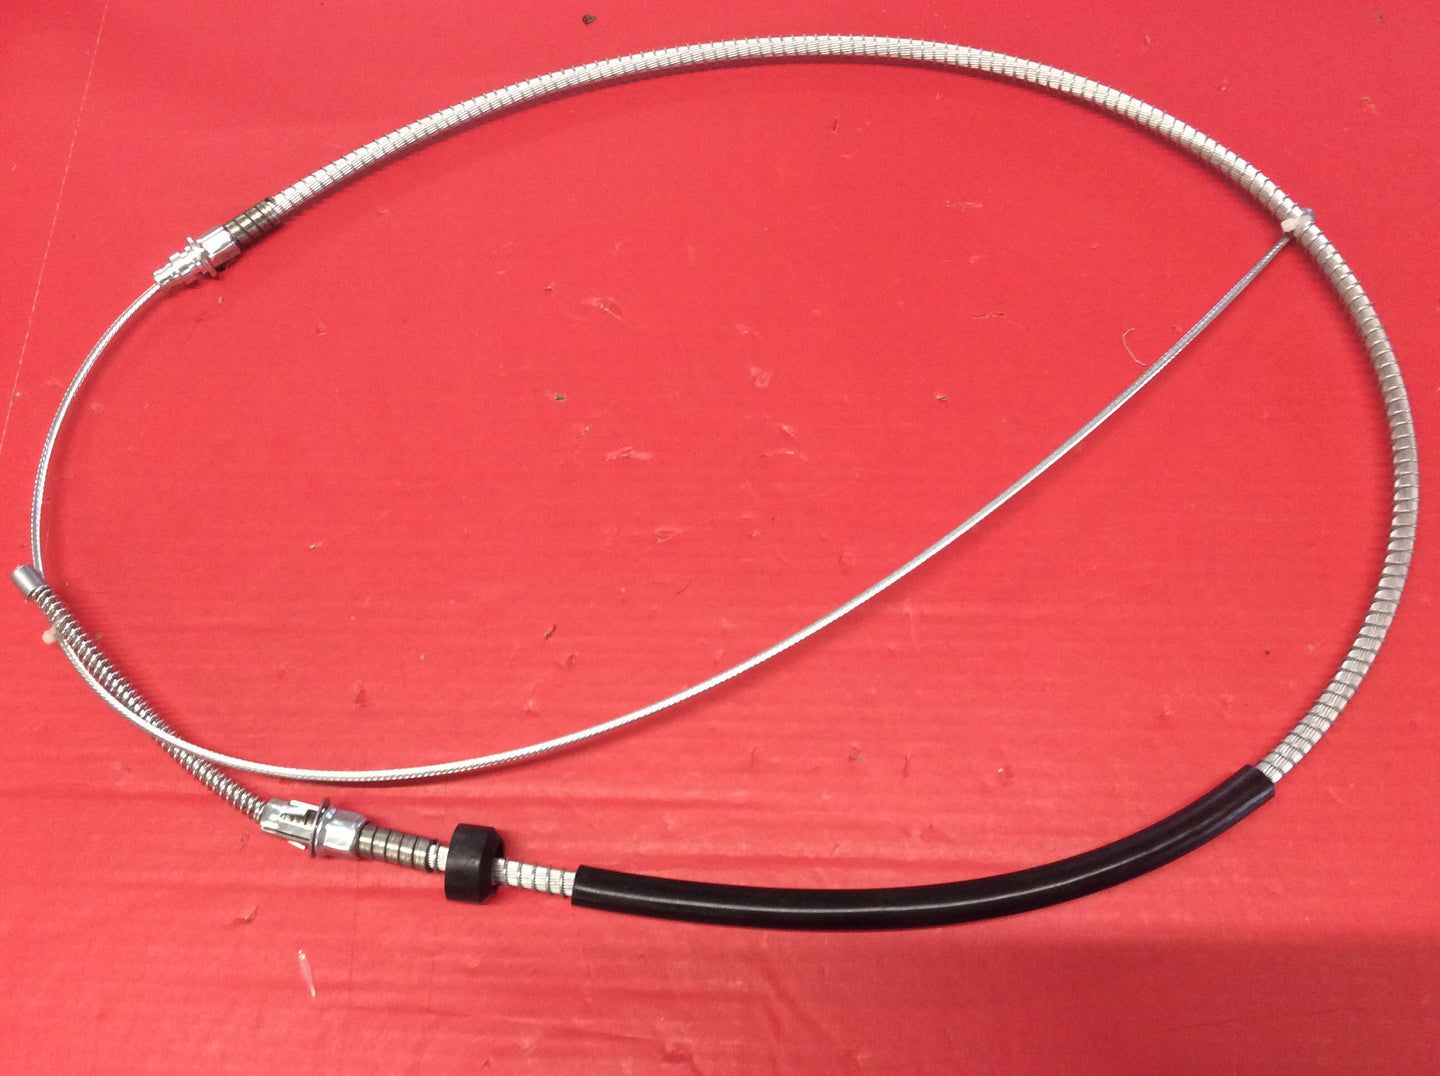 1964 1/2-1965 Mustang Rear Emergency Brake Cable 6 or 8 Cyl.  Fits Right or Left Need 2 per car. Measures 79 11/16